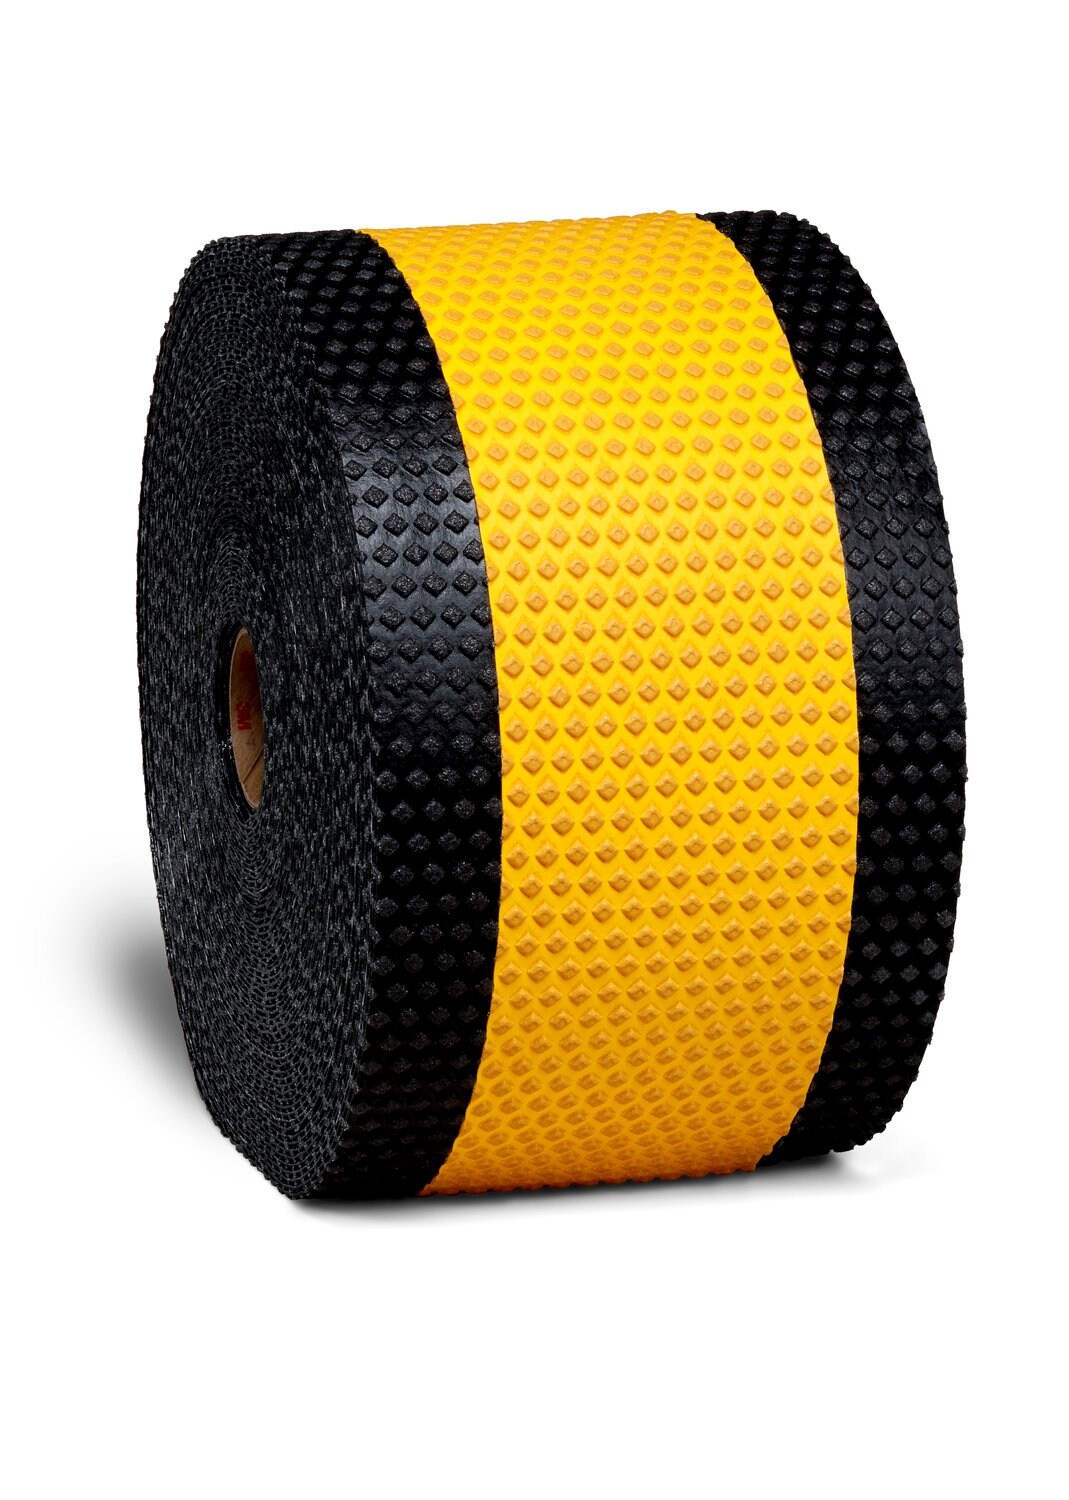 7010318012 - 3M Stamark High Performance Contrast Tape A381AW-5 Yellow/Black,
Net, 7 in x 50 yds, 4 in with 1.5 in borders